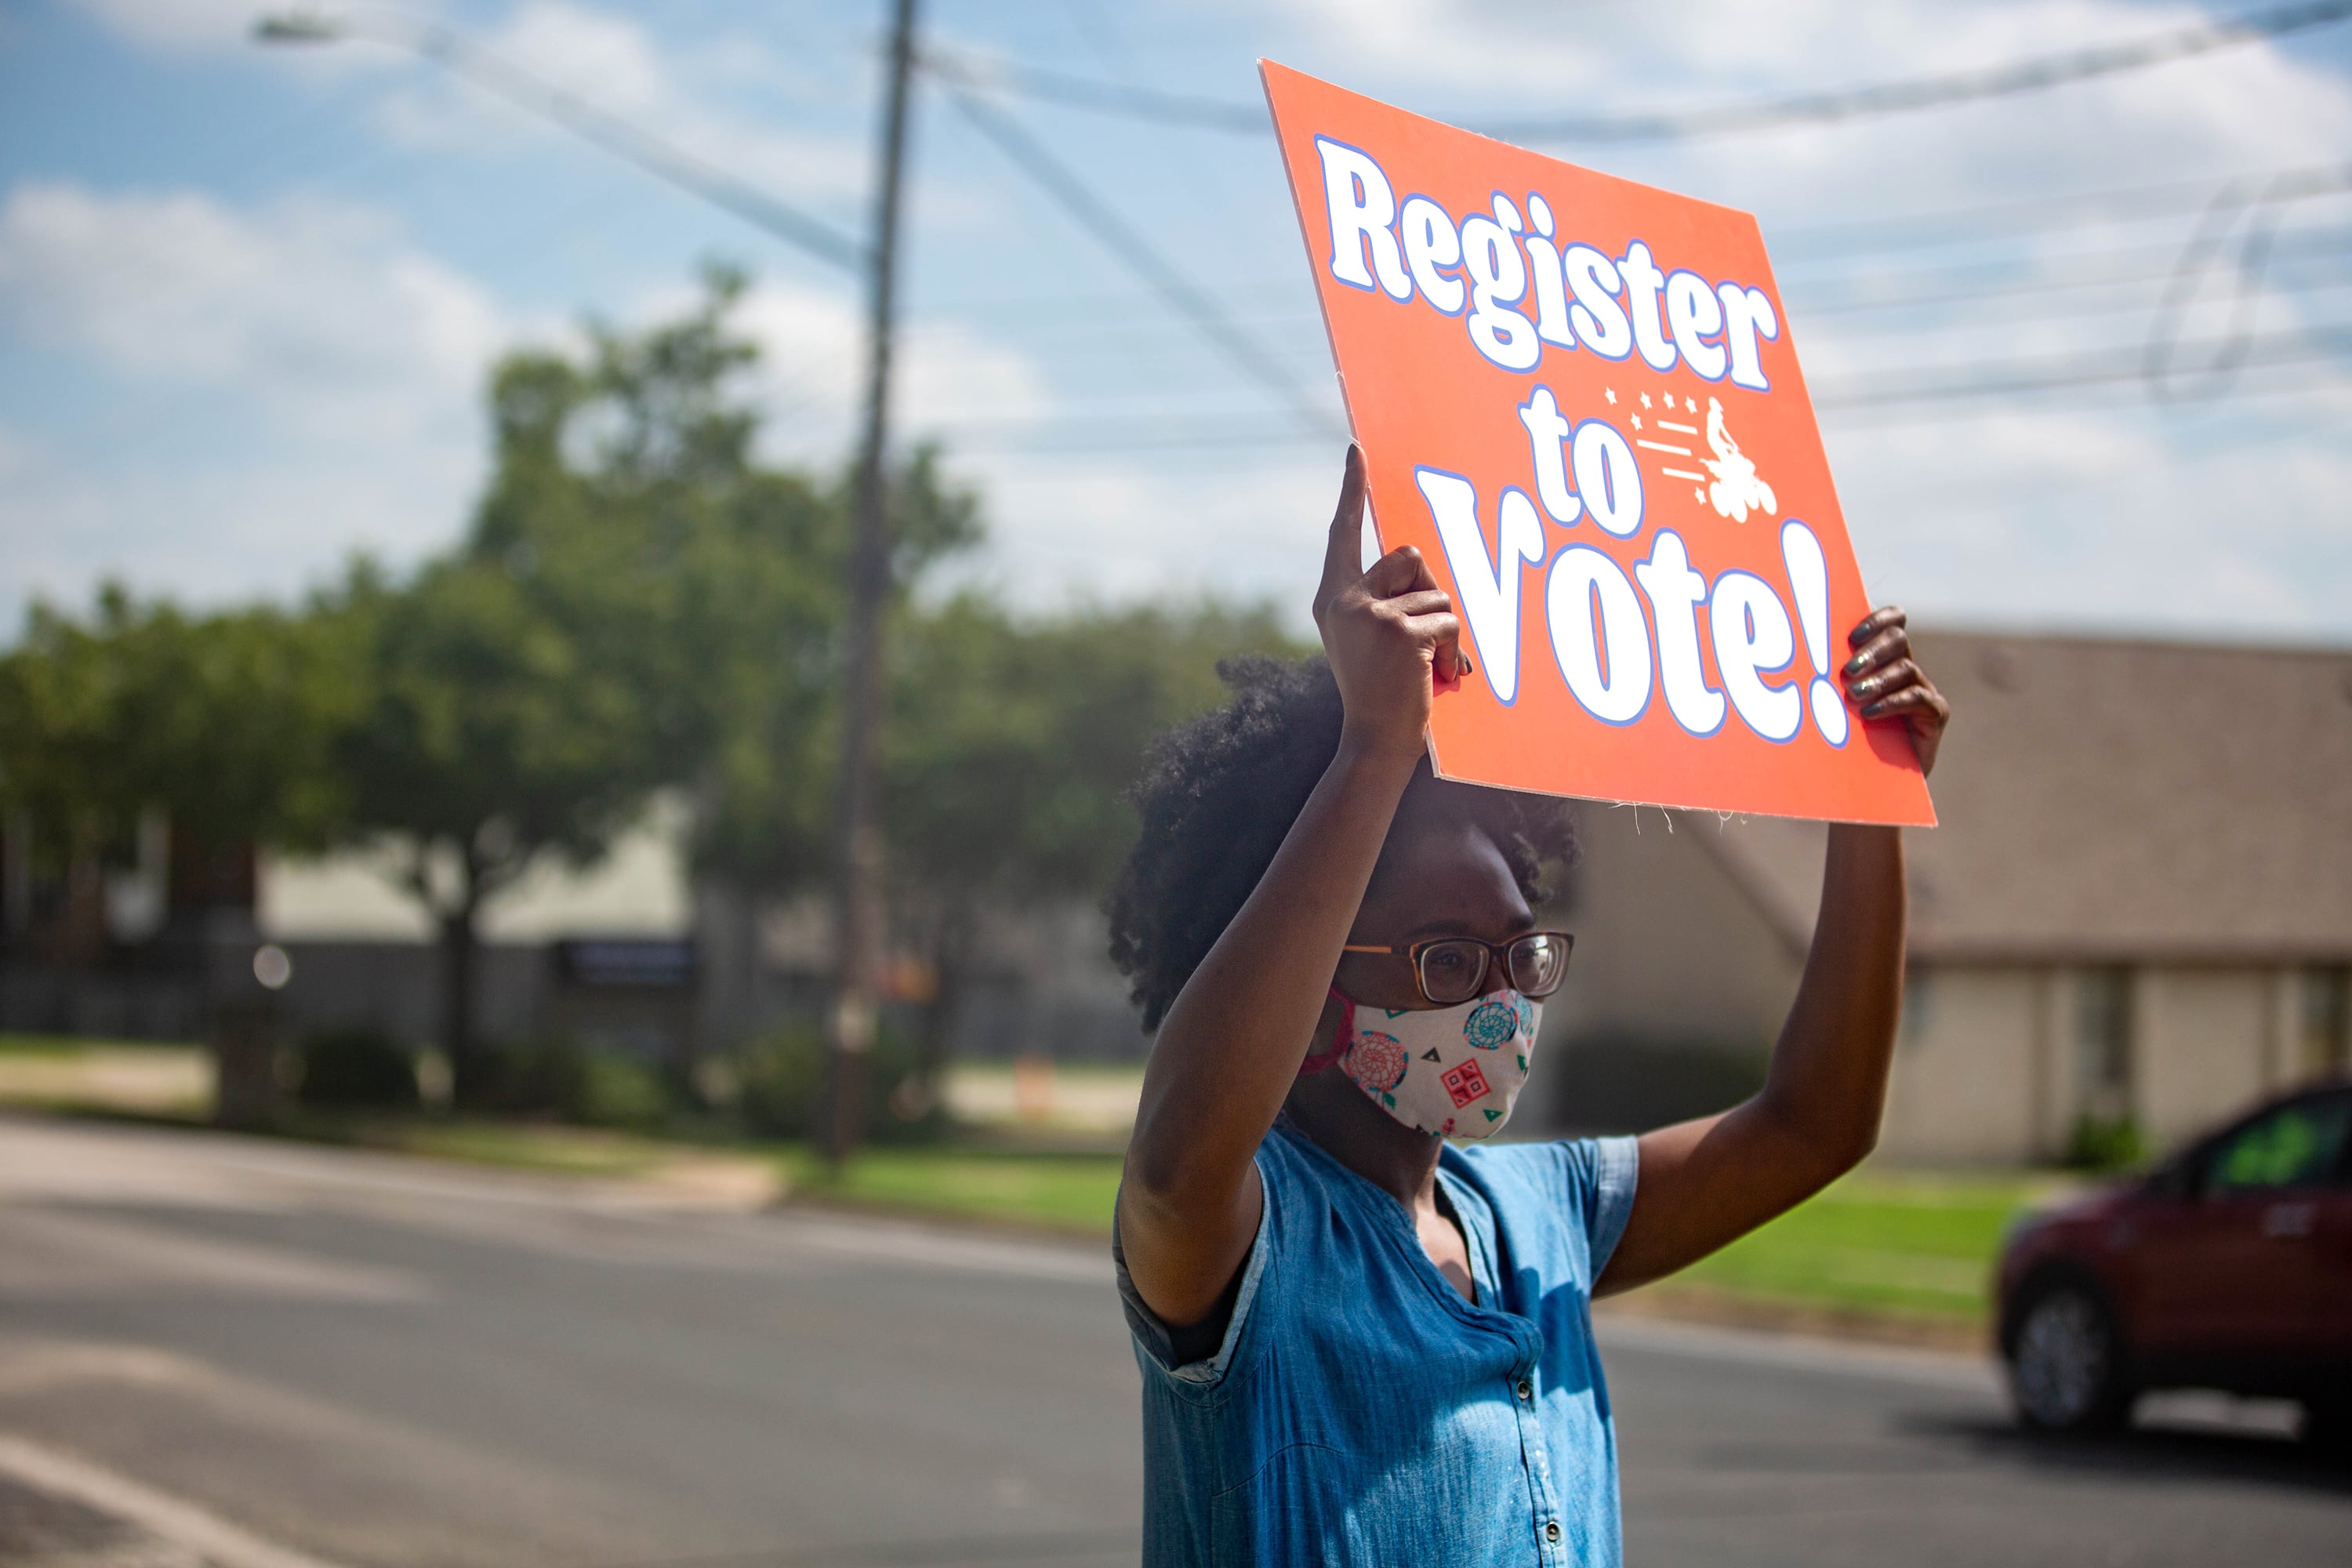 A woman standing on the side of a road holds a sign that says ‘register to vote’